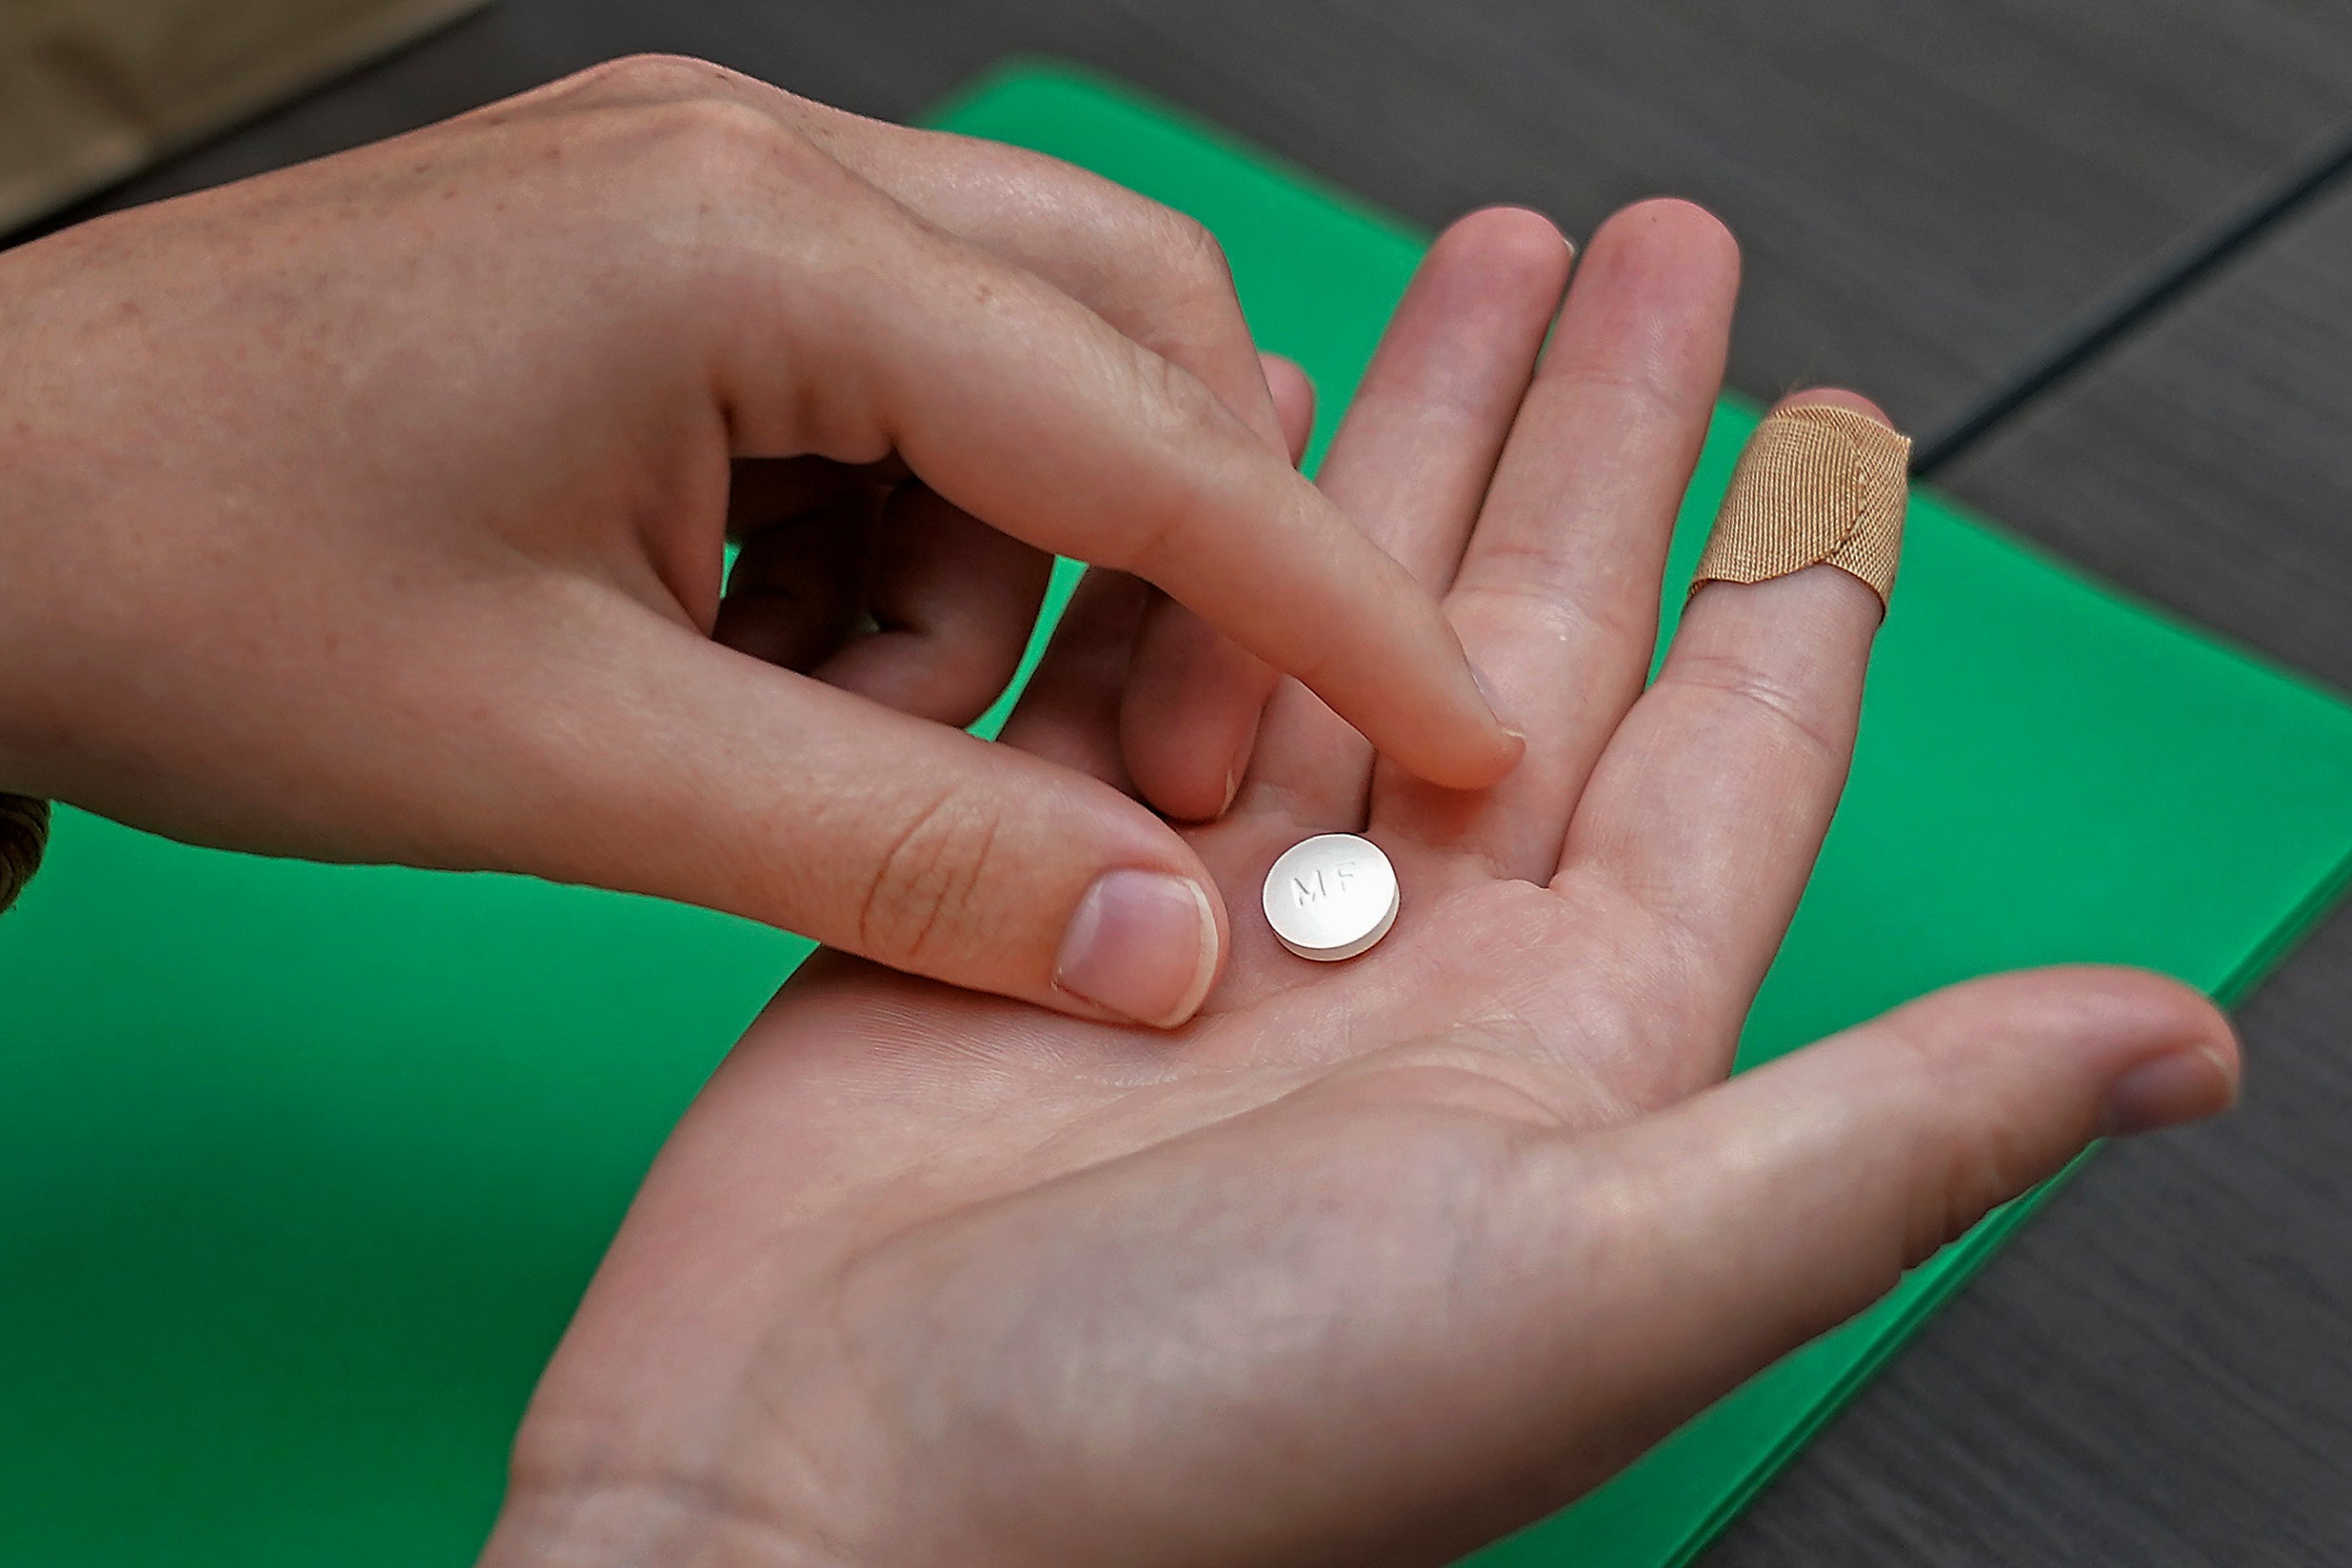 Japan's health ministry approves abortion pill for the first time | The Independent